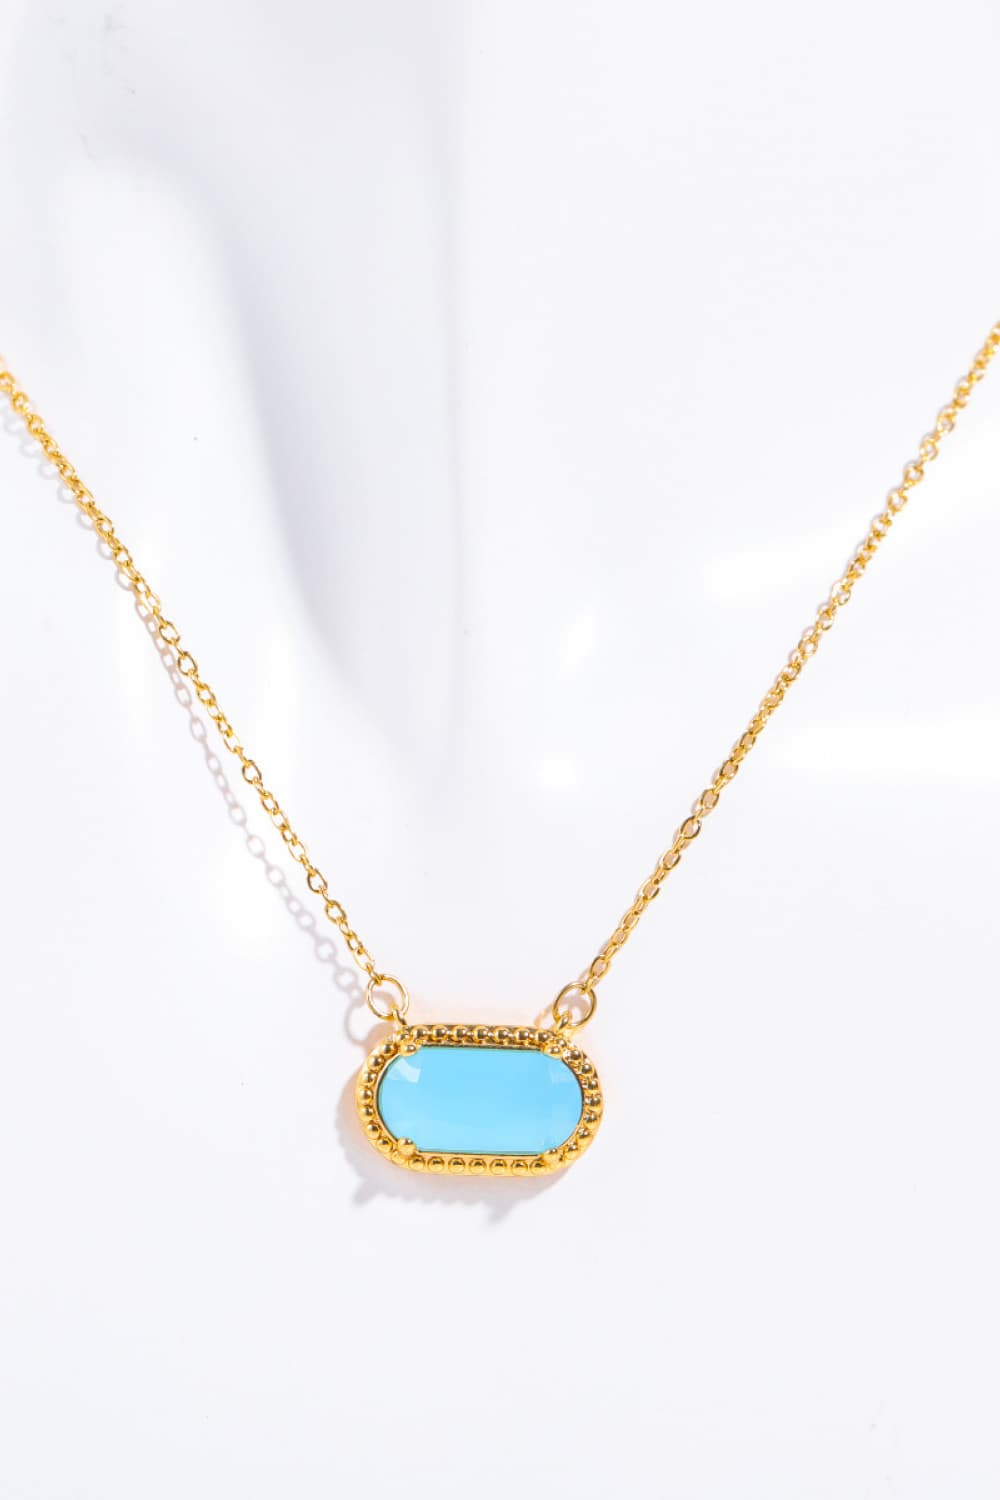 Trendsi Cupid Beauty Supplies Sky Blue / One Size Women Necklace Copper 14K Gold Pleated Pendant Necklace